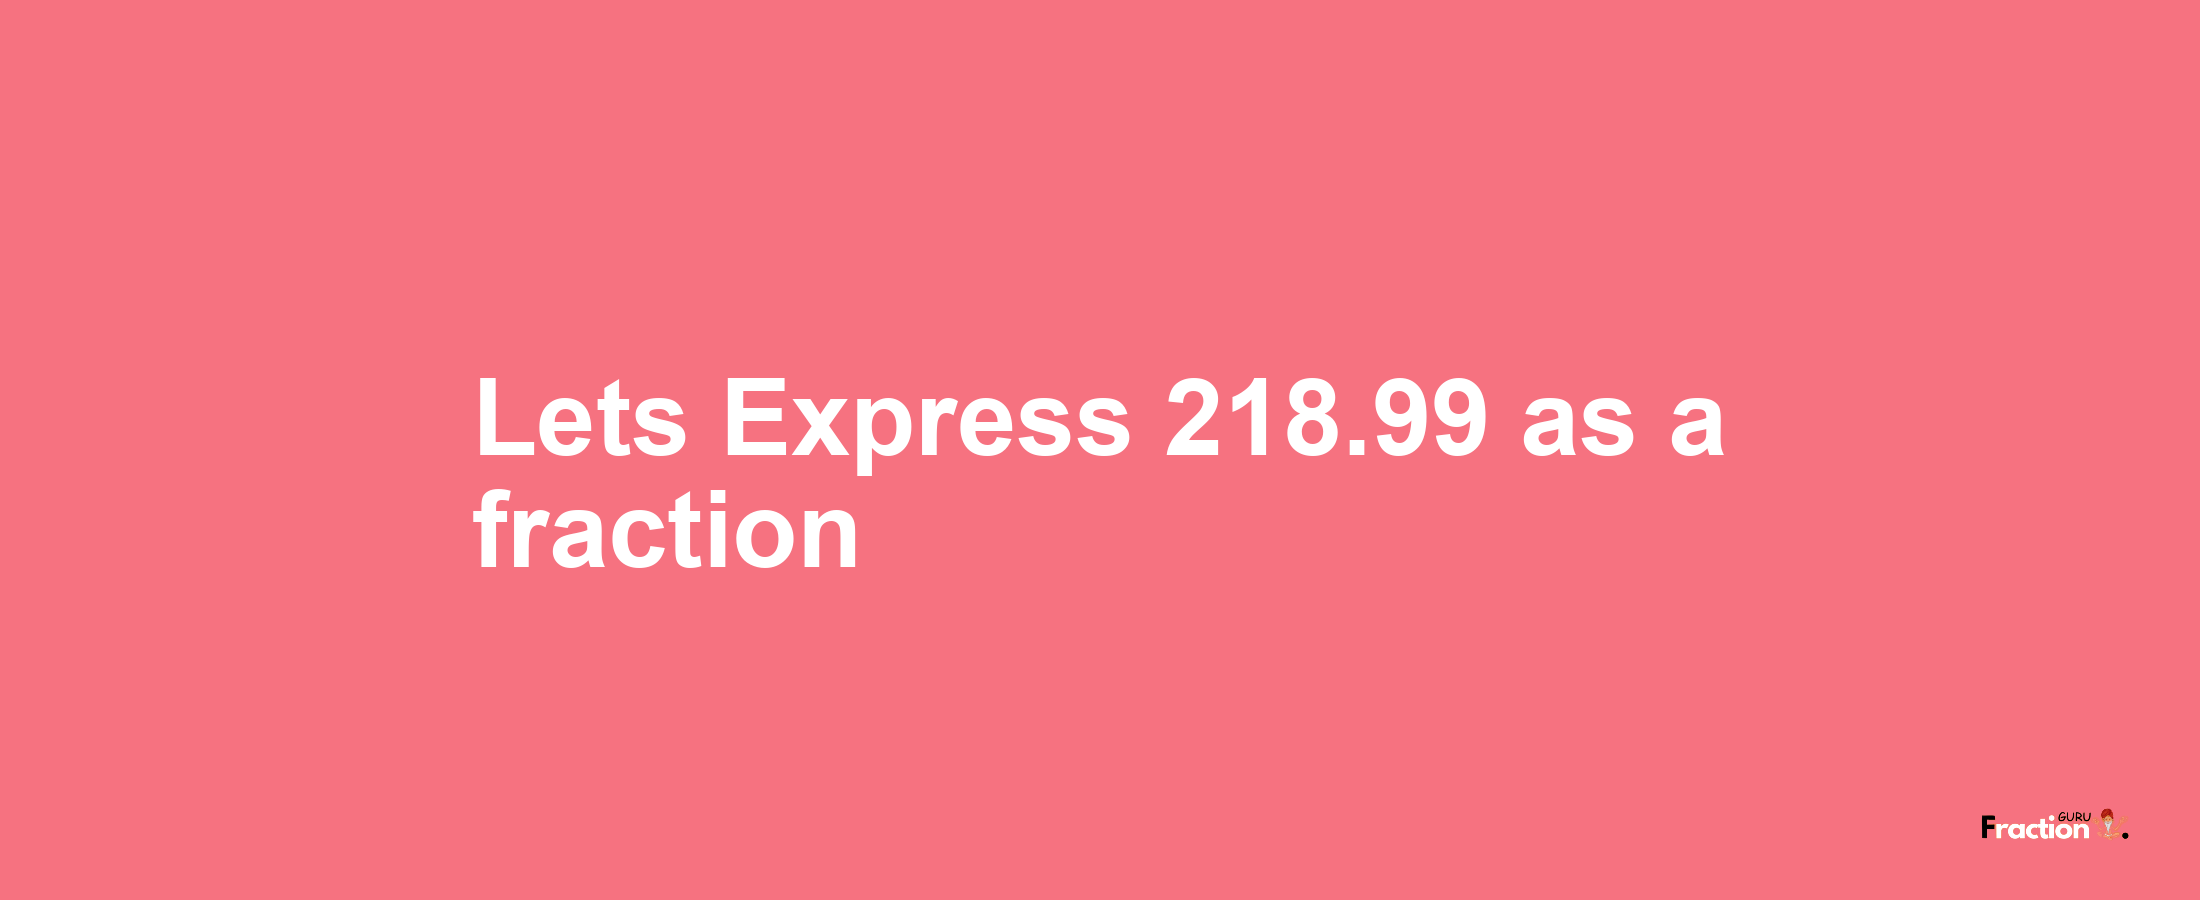 Lets Express 218.99 as afraction